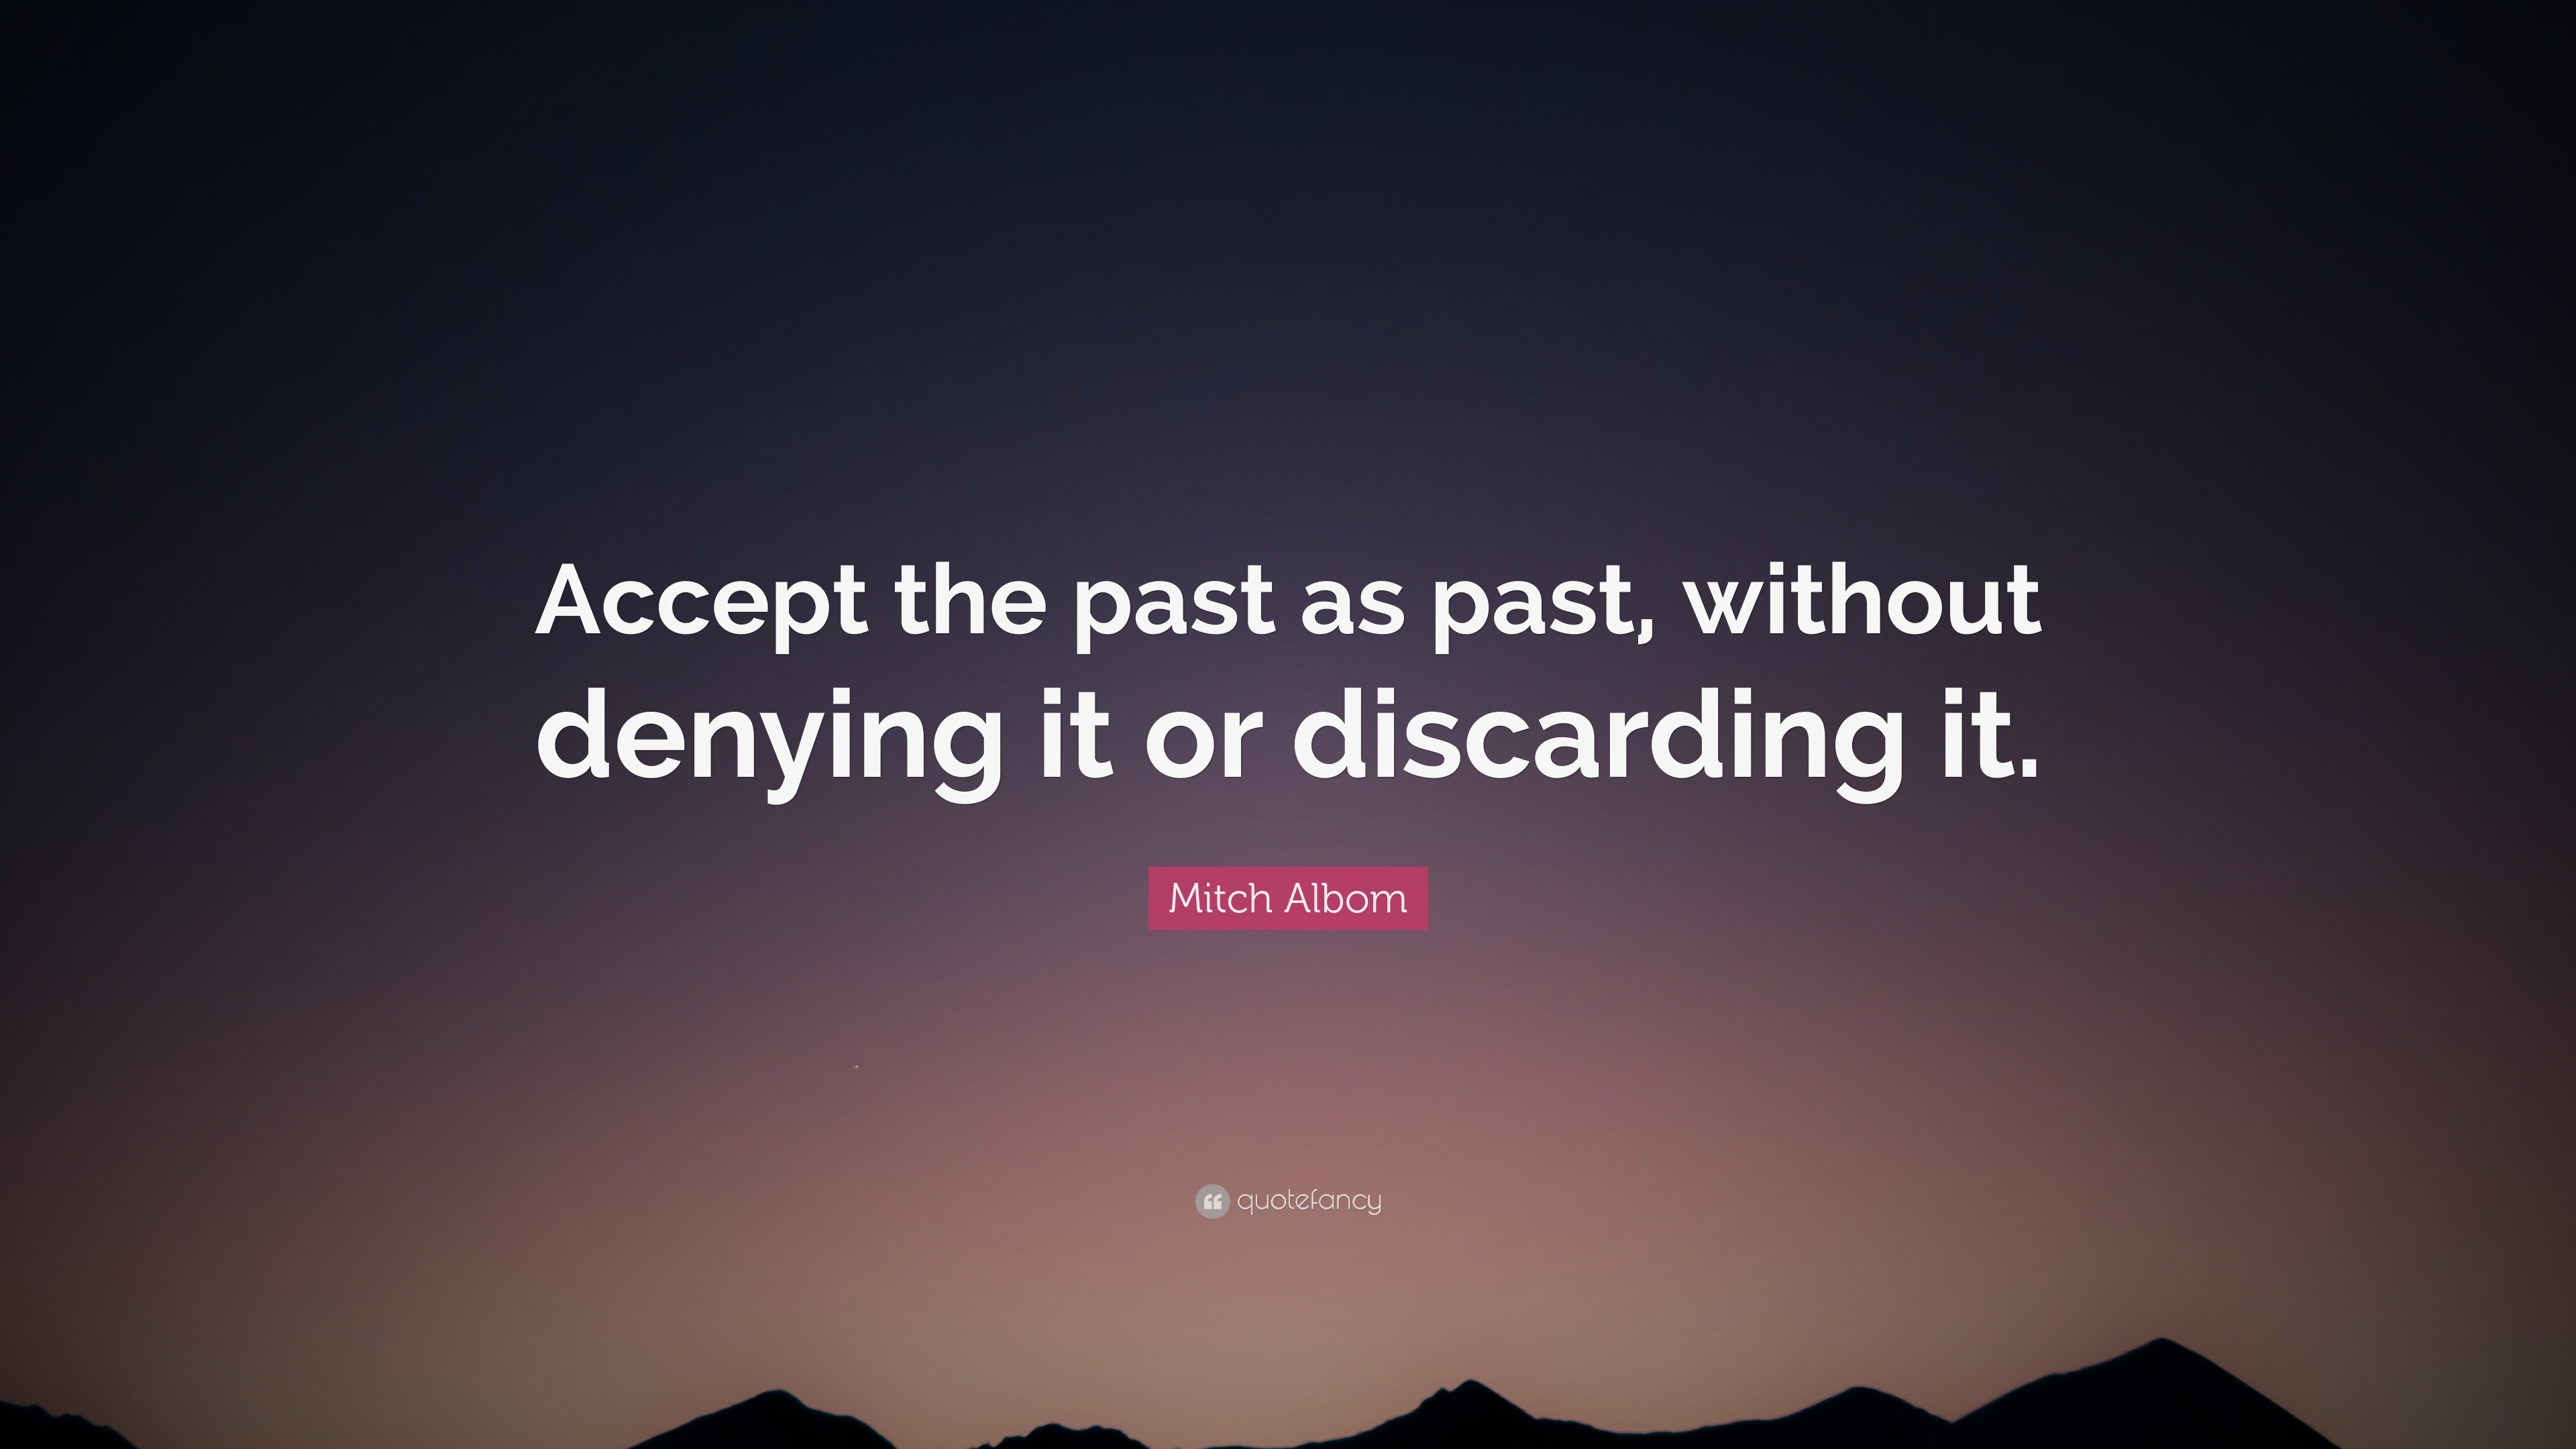 "accept the past as past, without denying it or discarding it.